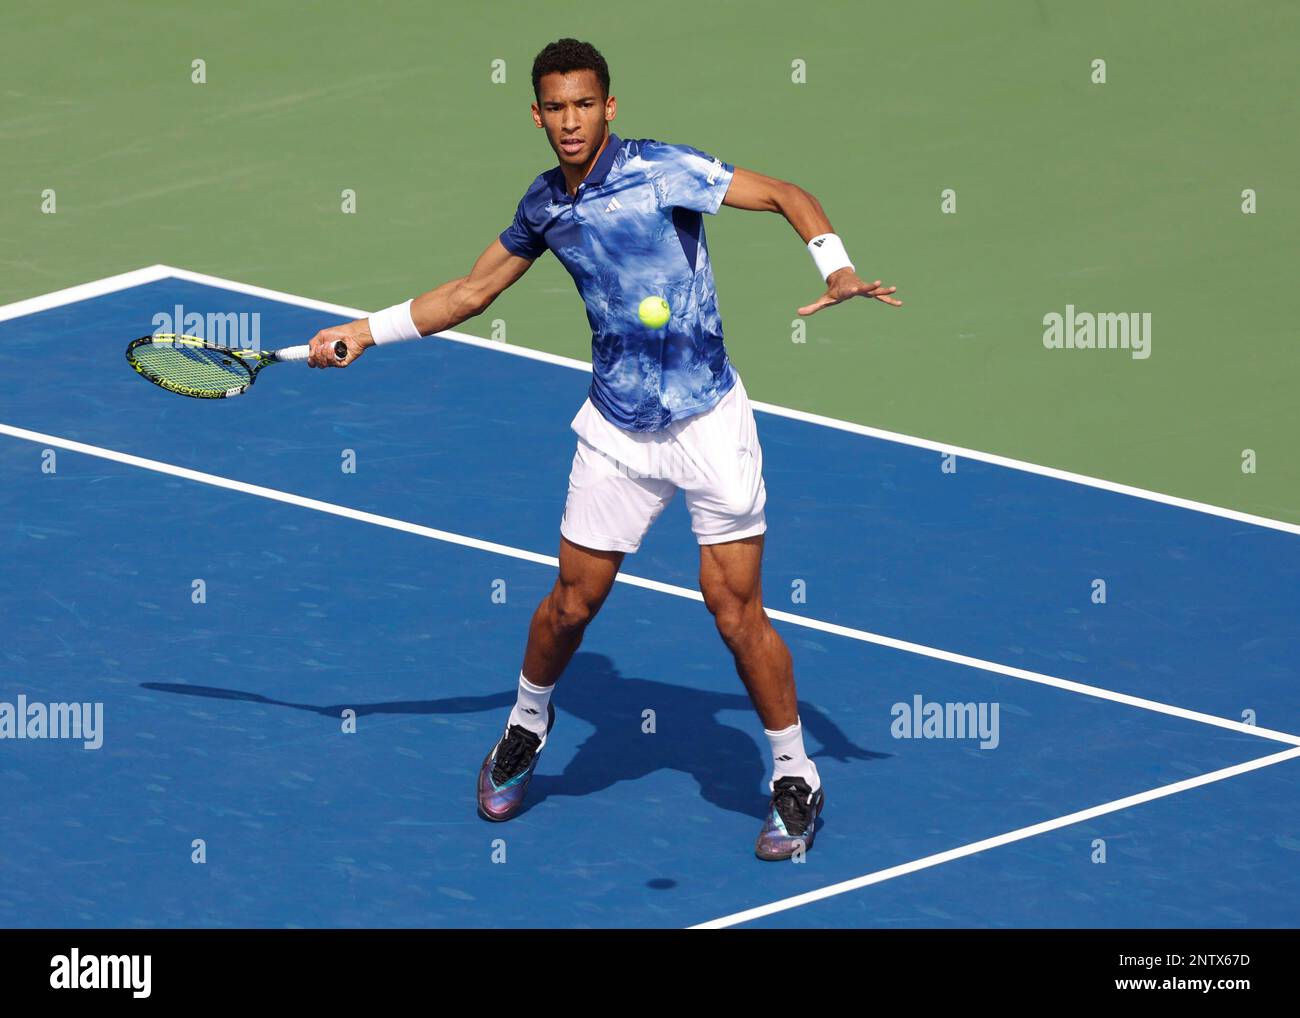 foder Kent vand blomsten Dubai, UAE, 28th..Feb, 2023. Canadian tennis player Felix Auger-Aliassime  (CAN) in action at the Dubai Duty Free Tennis Championships ATP tournament  at Dubai Duty Free Tennis Stadium on Tuesday 28 February 202., ©